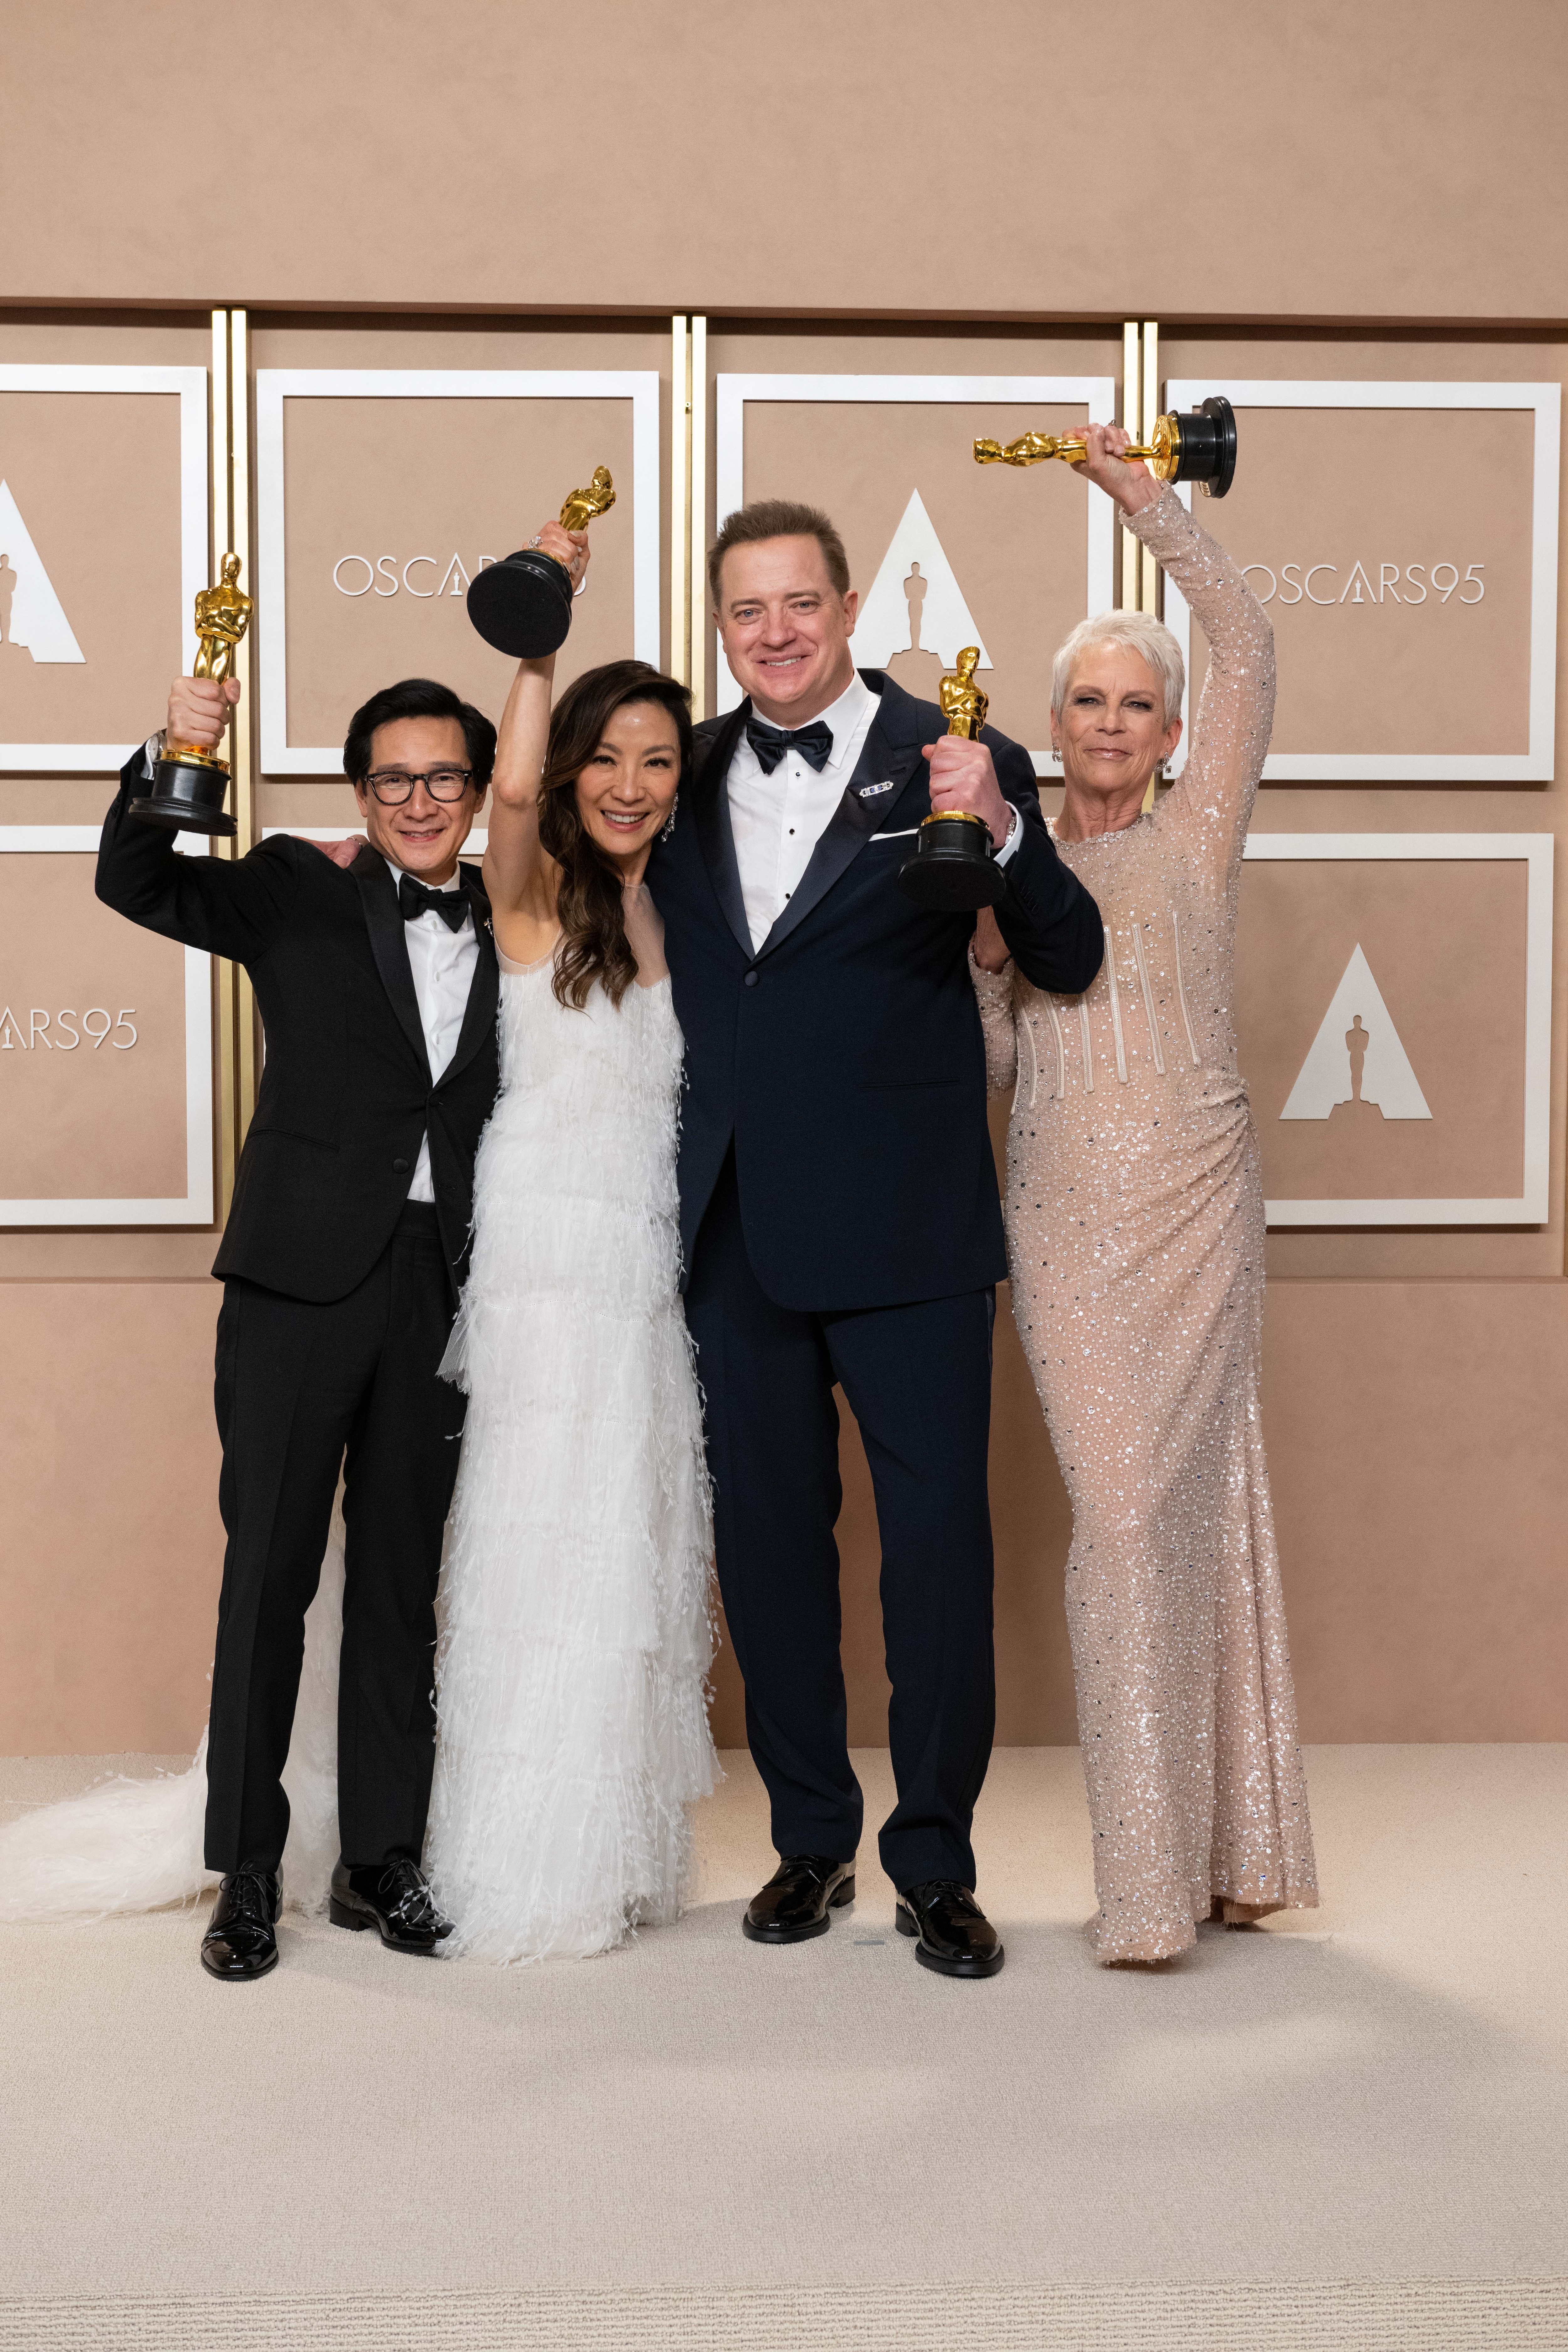 Oscar winners 2021: Full list of results for Academy Awards